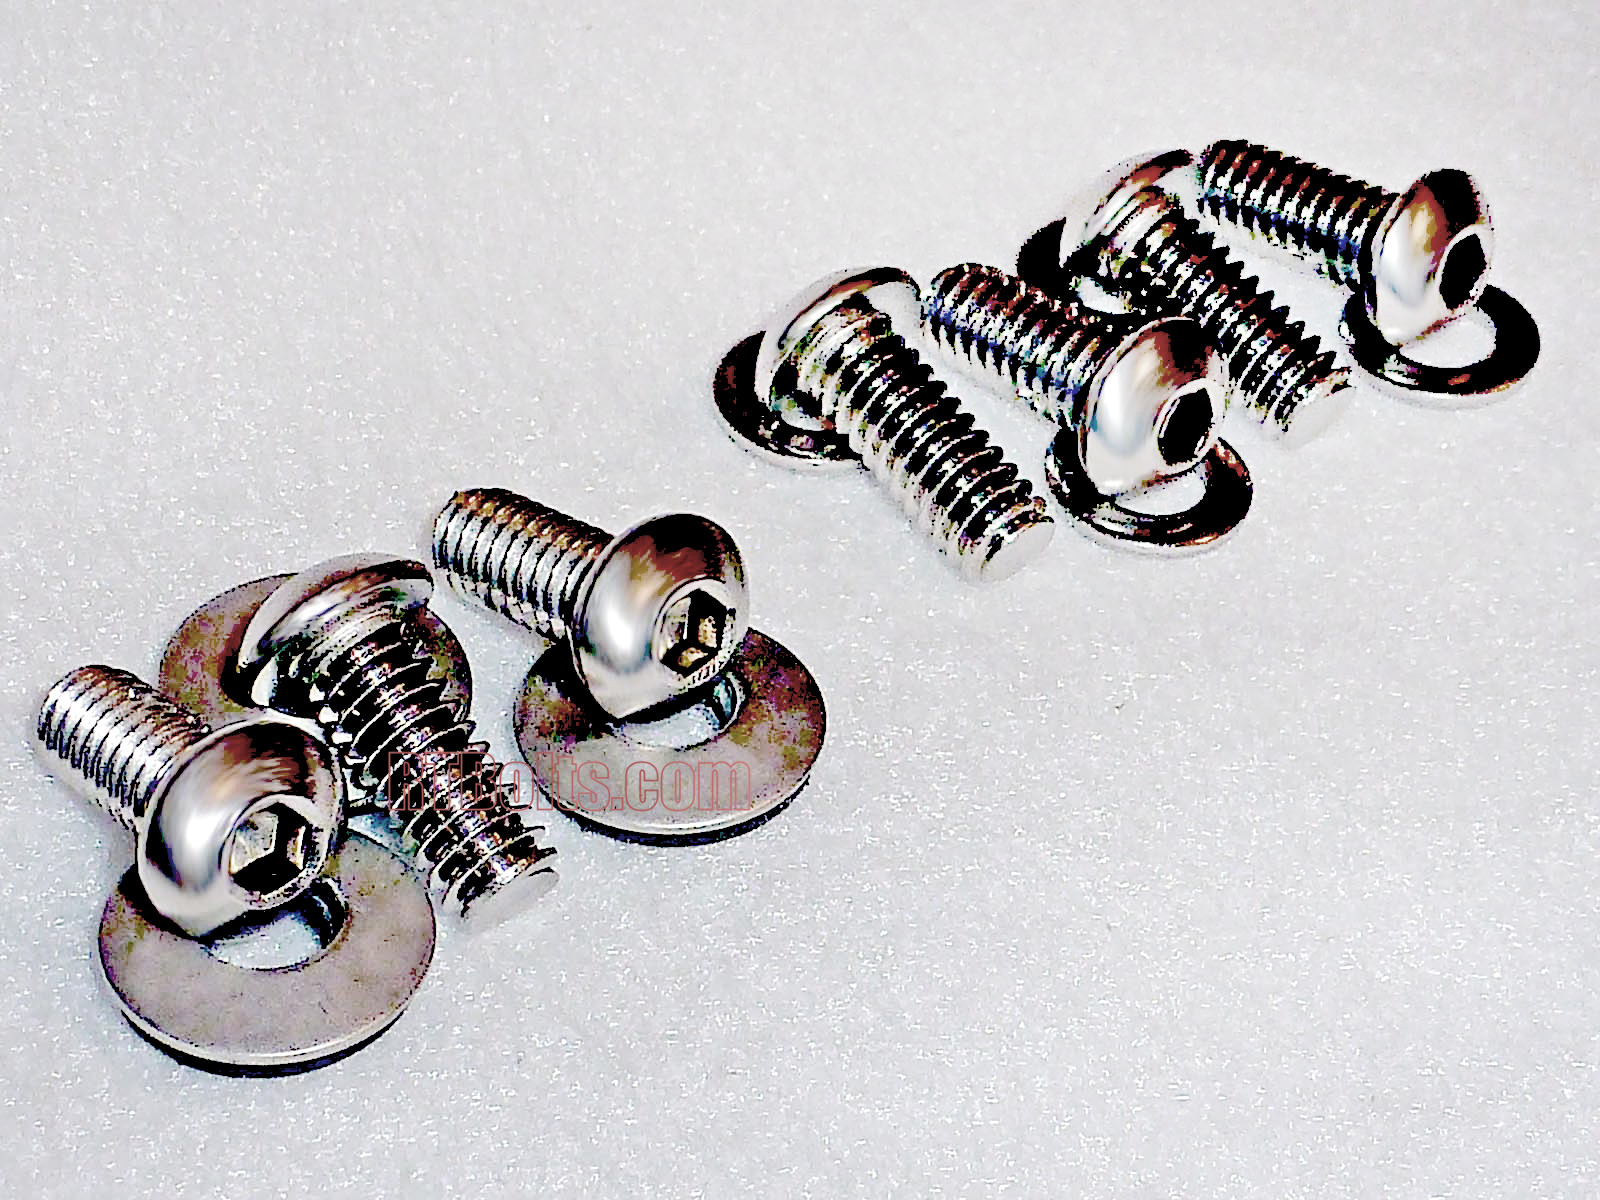 Harley Fairing & Windshield Bolts Screws • 1996-2013 Glides • No Rust Stainless